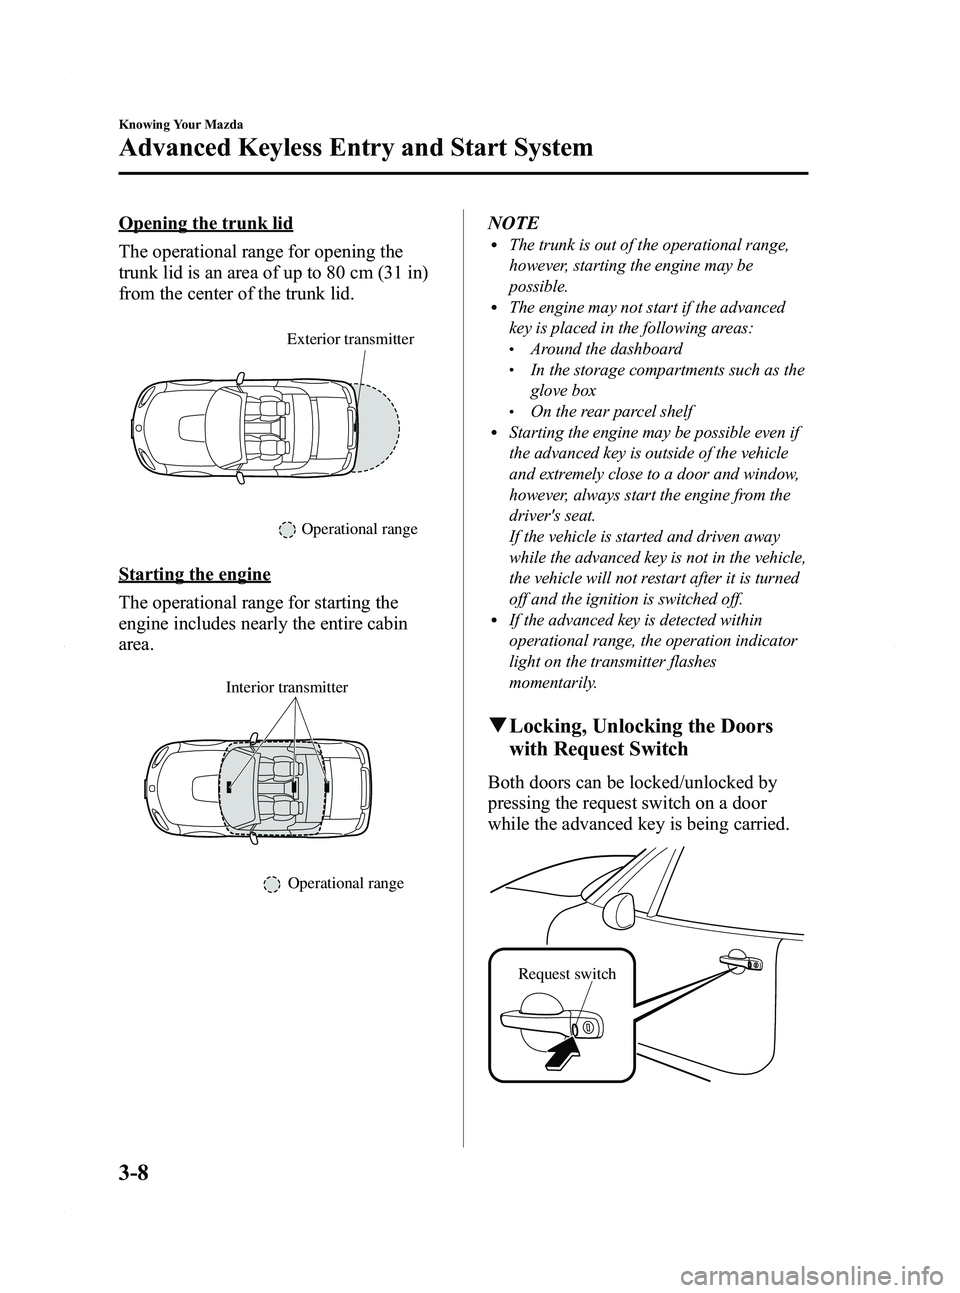 MAZDA MODEL MX-5 MIATA PRHT 2011 User Guide Black plate (72,1)
Opening the trunk lid
The operational range for opening the
trunk lid is an area of up to 80 cm (31 in)
from the center of the trunk lid.
Exterior transmitter
Operational range
Star